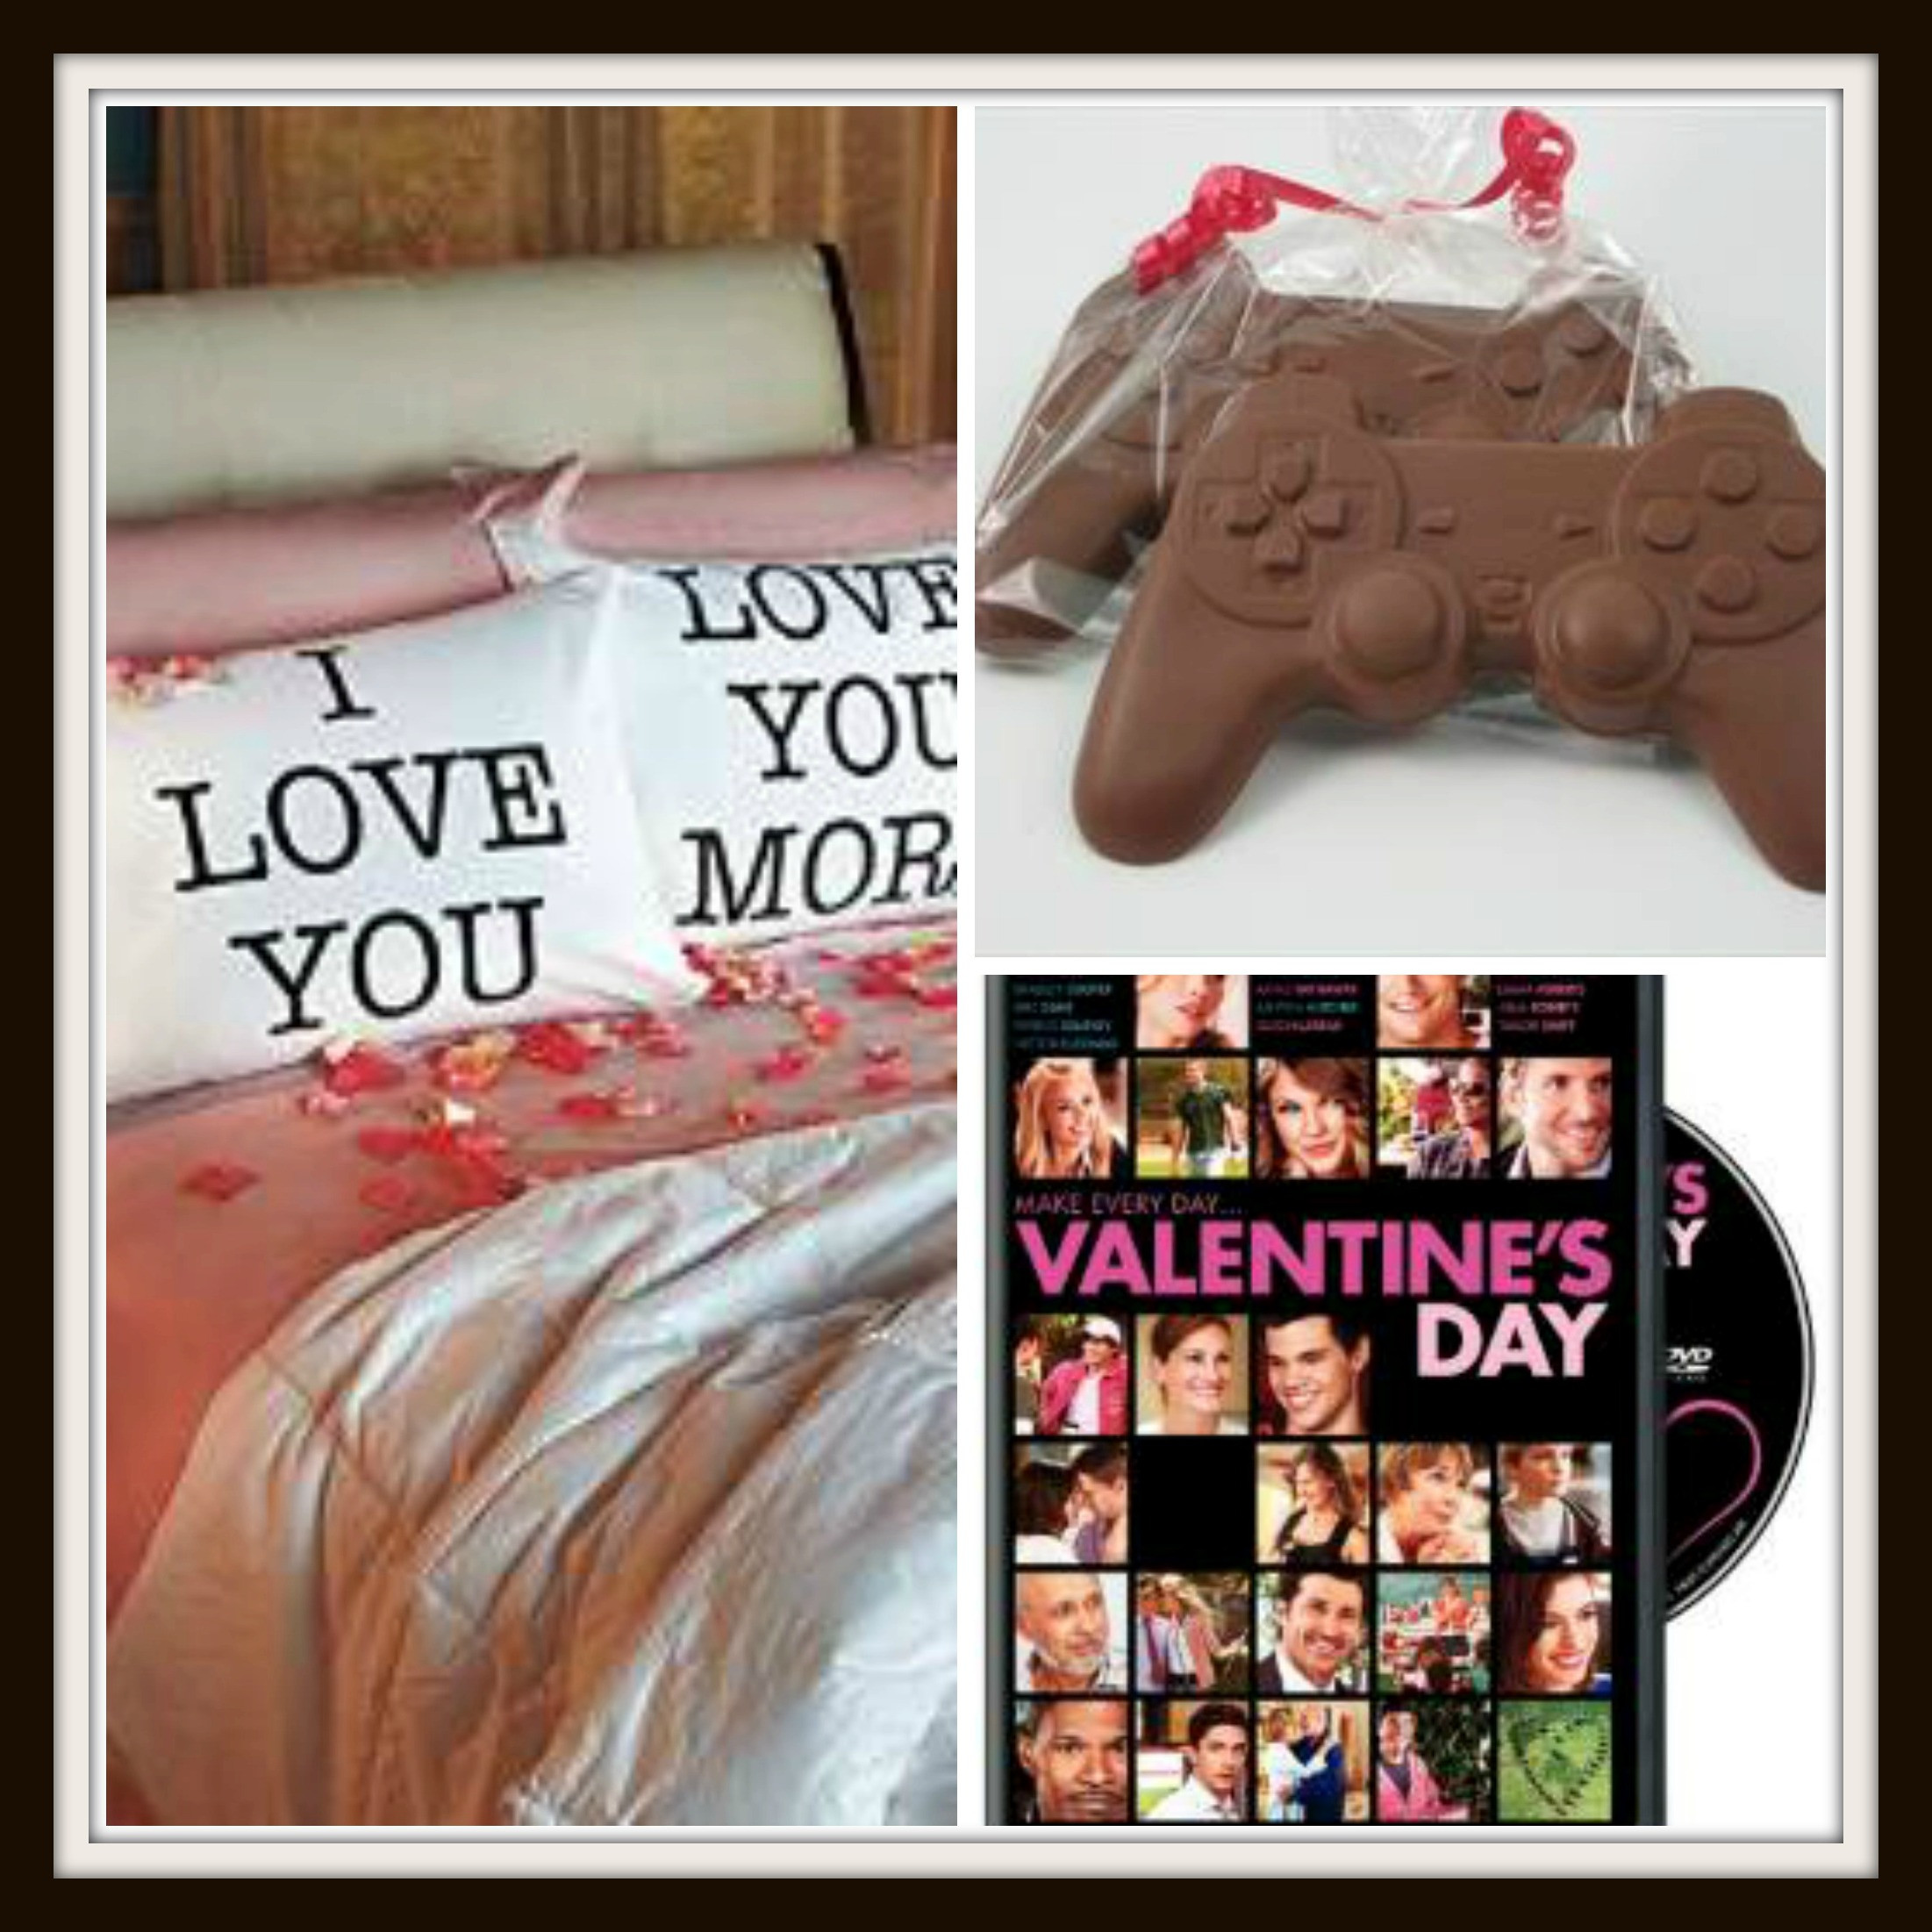 Valentines Gift Ideas For Friends
 21 Fun Valentine’s Gifts for Friends and Family